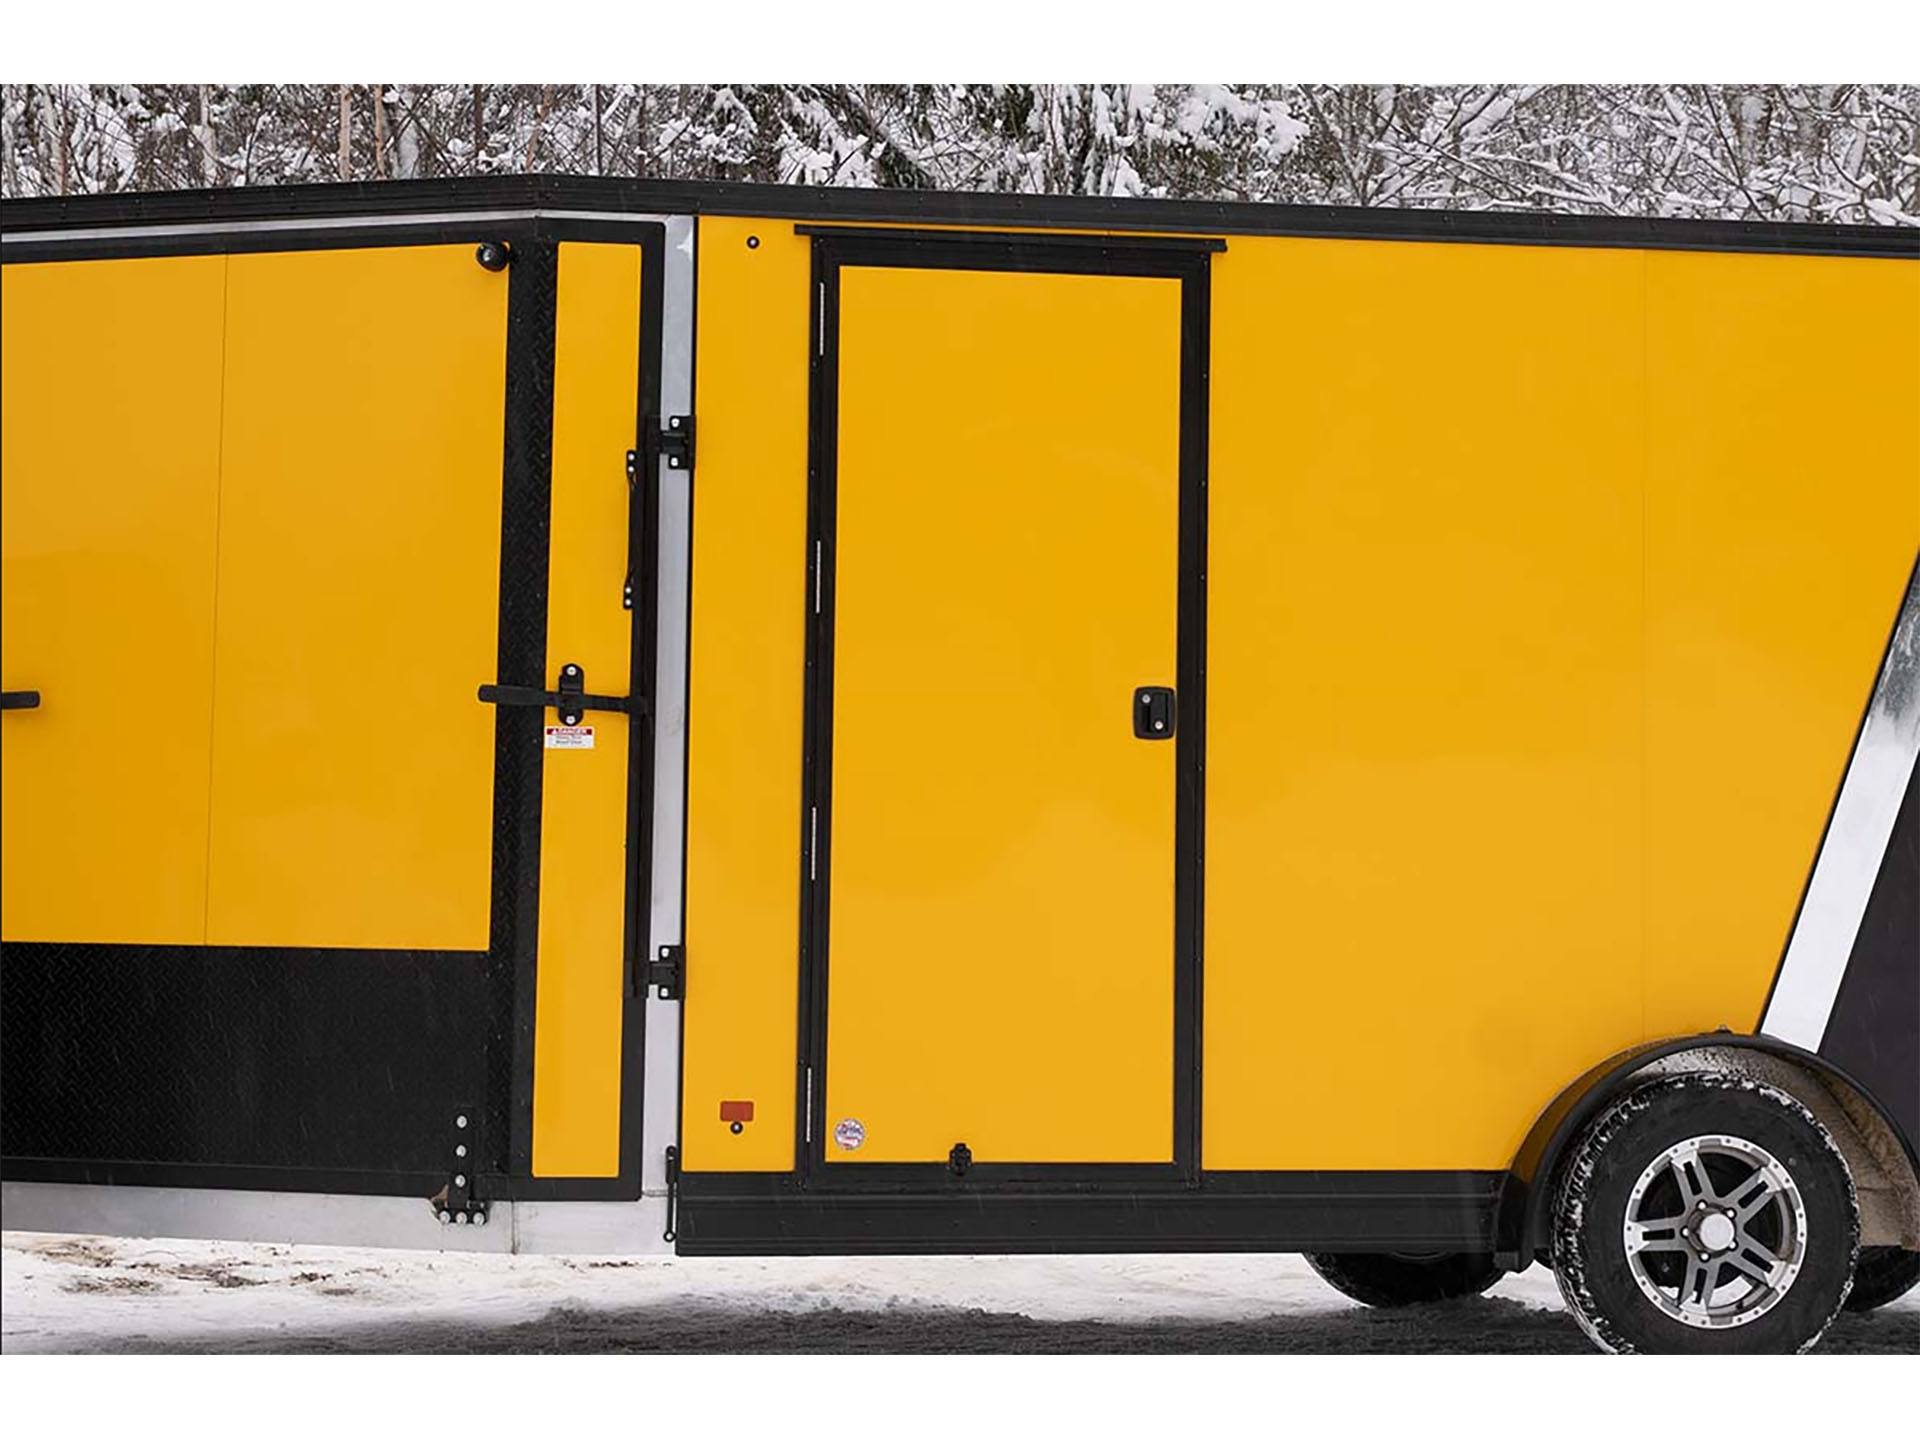 2024 Polaris Trailers Enclosed Elite Limited Snow Trailers 7 ft. Wide - 18 ft. Long in Cottonwood, Idaho - Photo 5